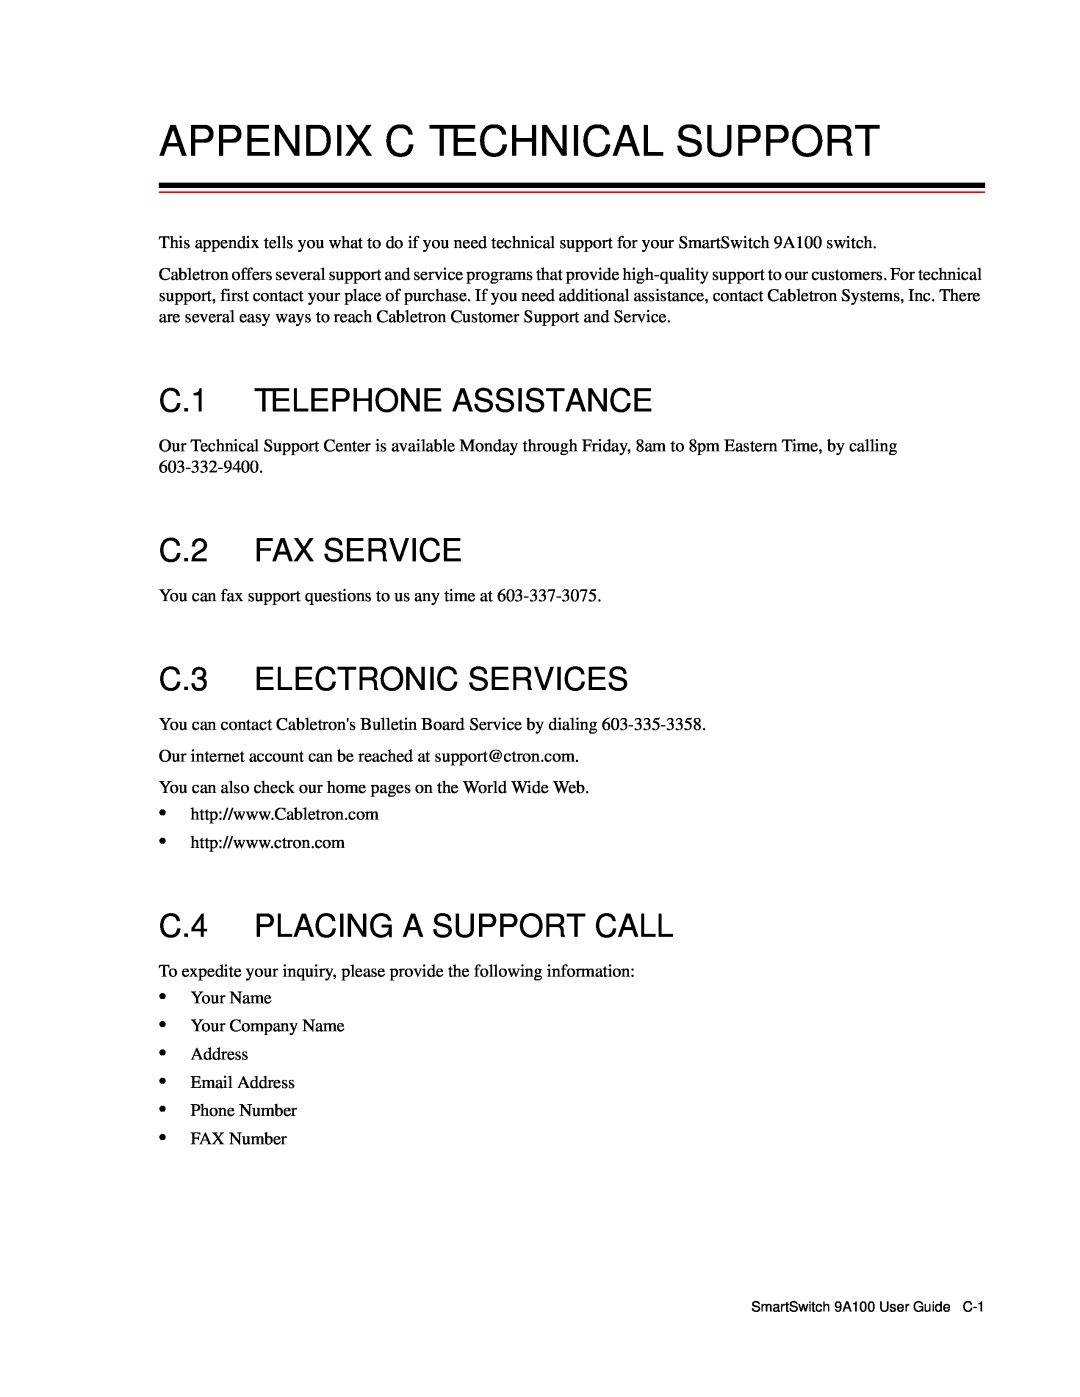 Cabletron Systems 9A100 Appendix C Technical Support, C.1 TELEPHONE ASSISTANCE, C.2 FAX SERVICE, C.3 ELECTRONIC SERVICES 